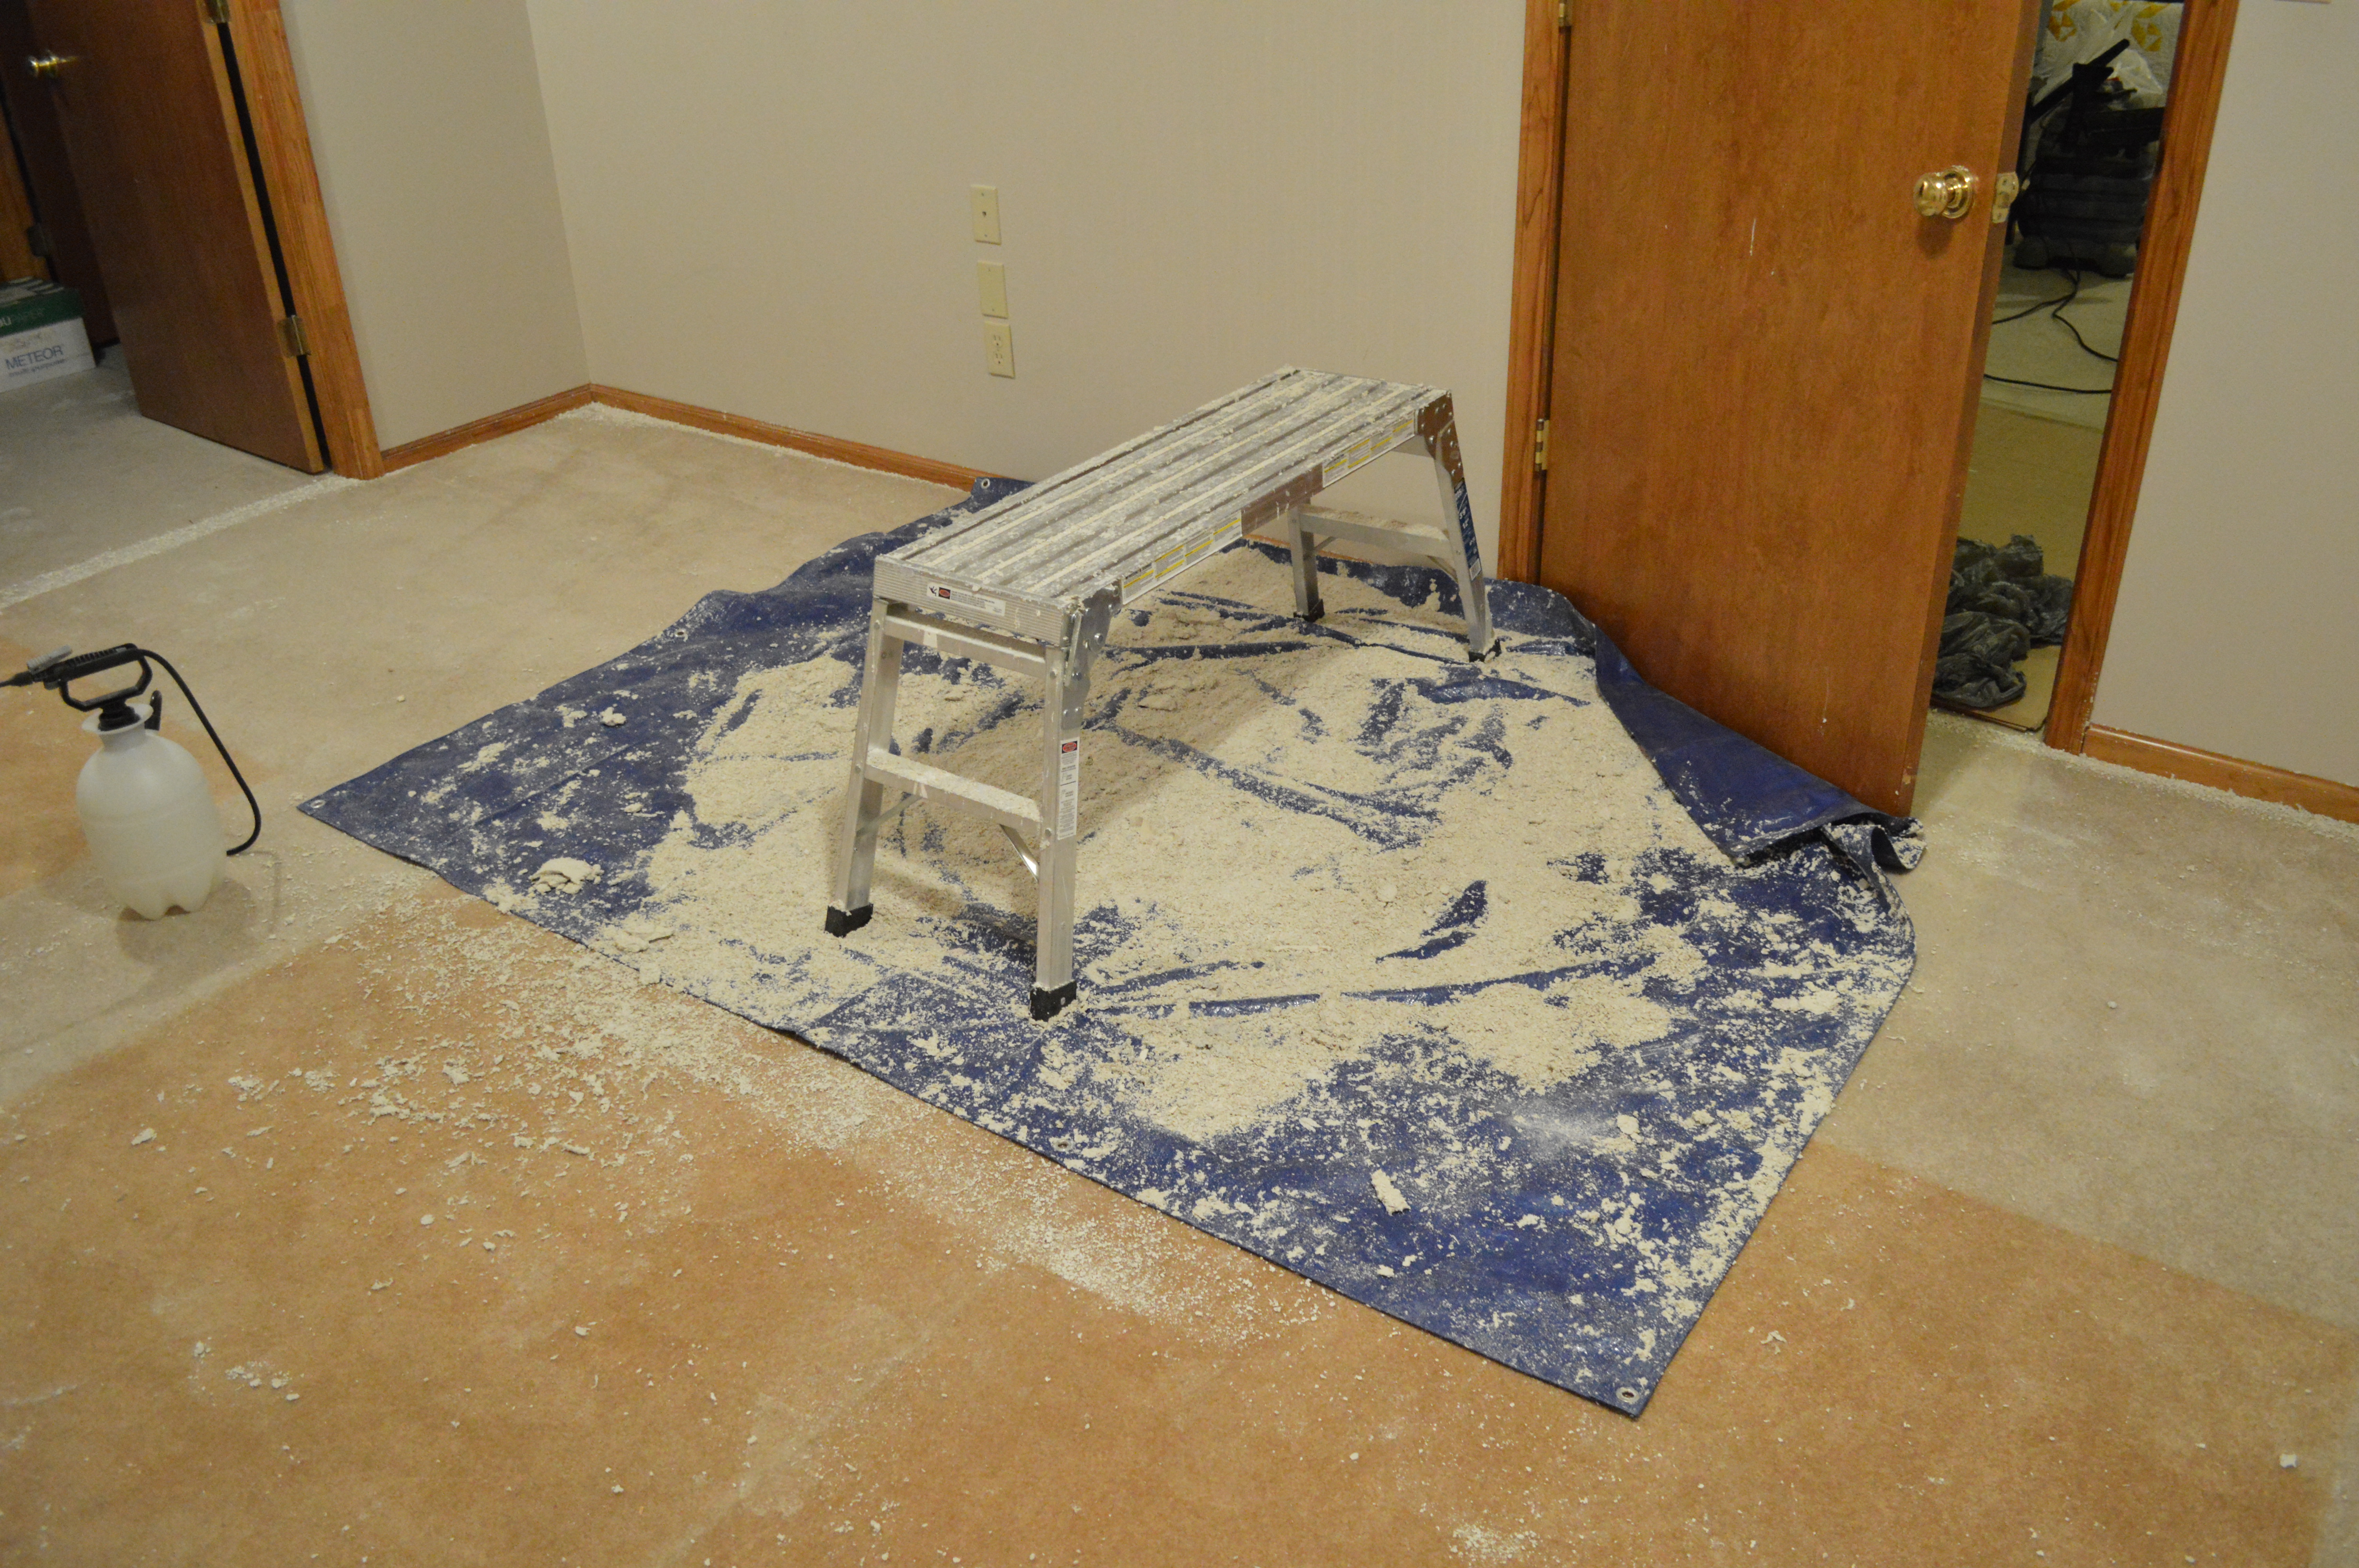 How to Paint a Popcorn Ceiling Without Making a Mess